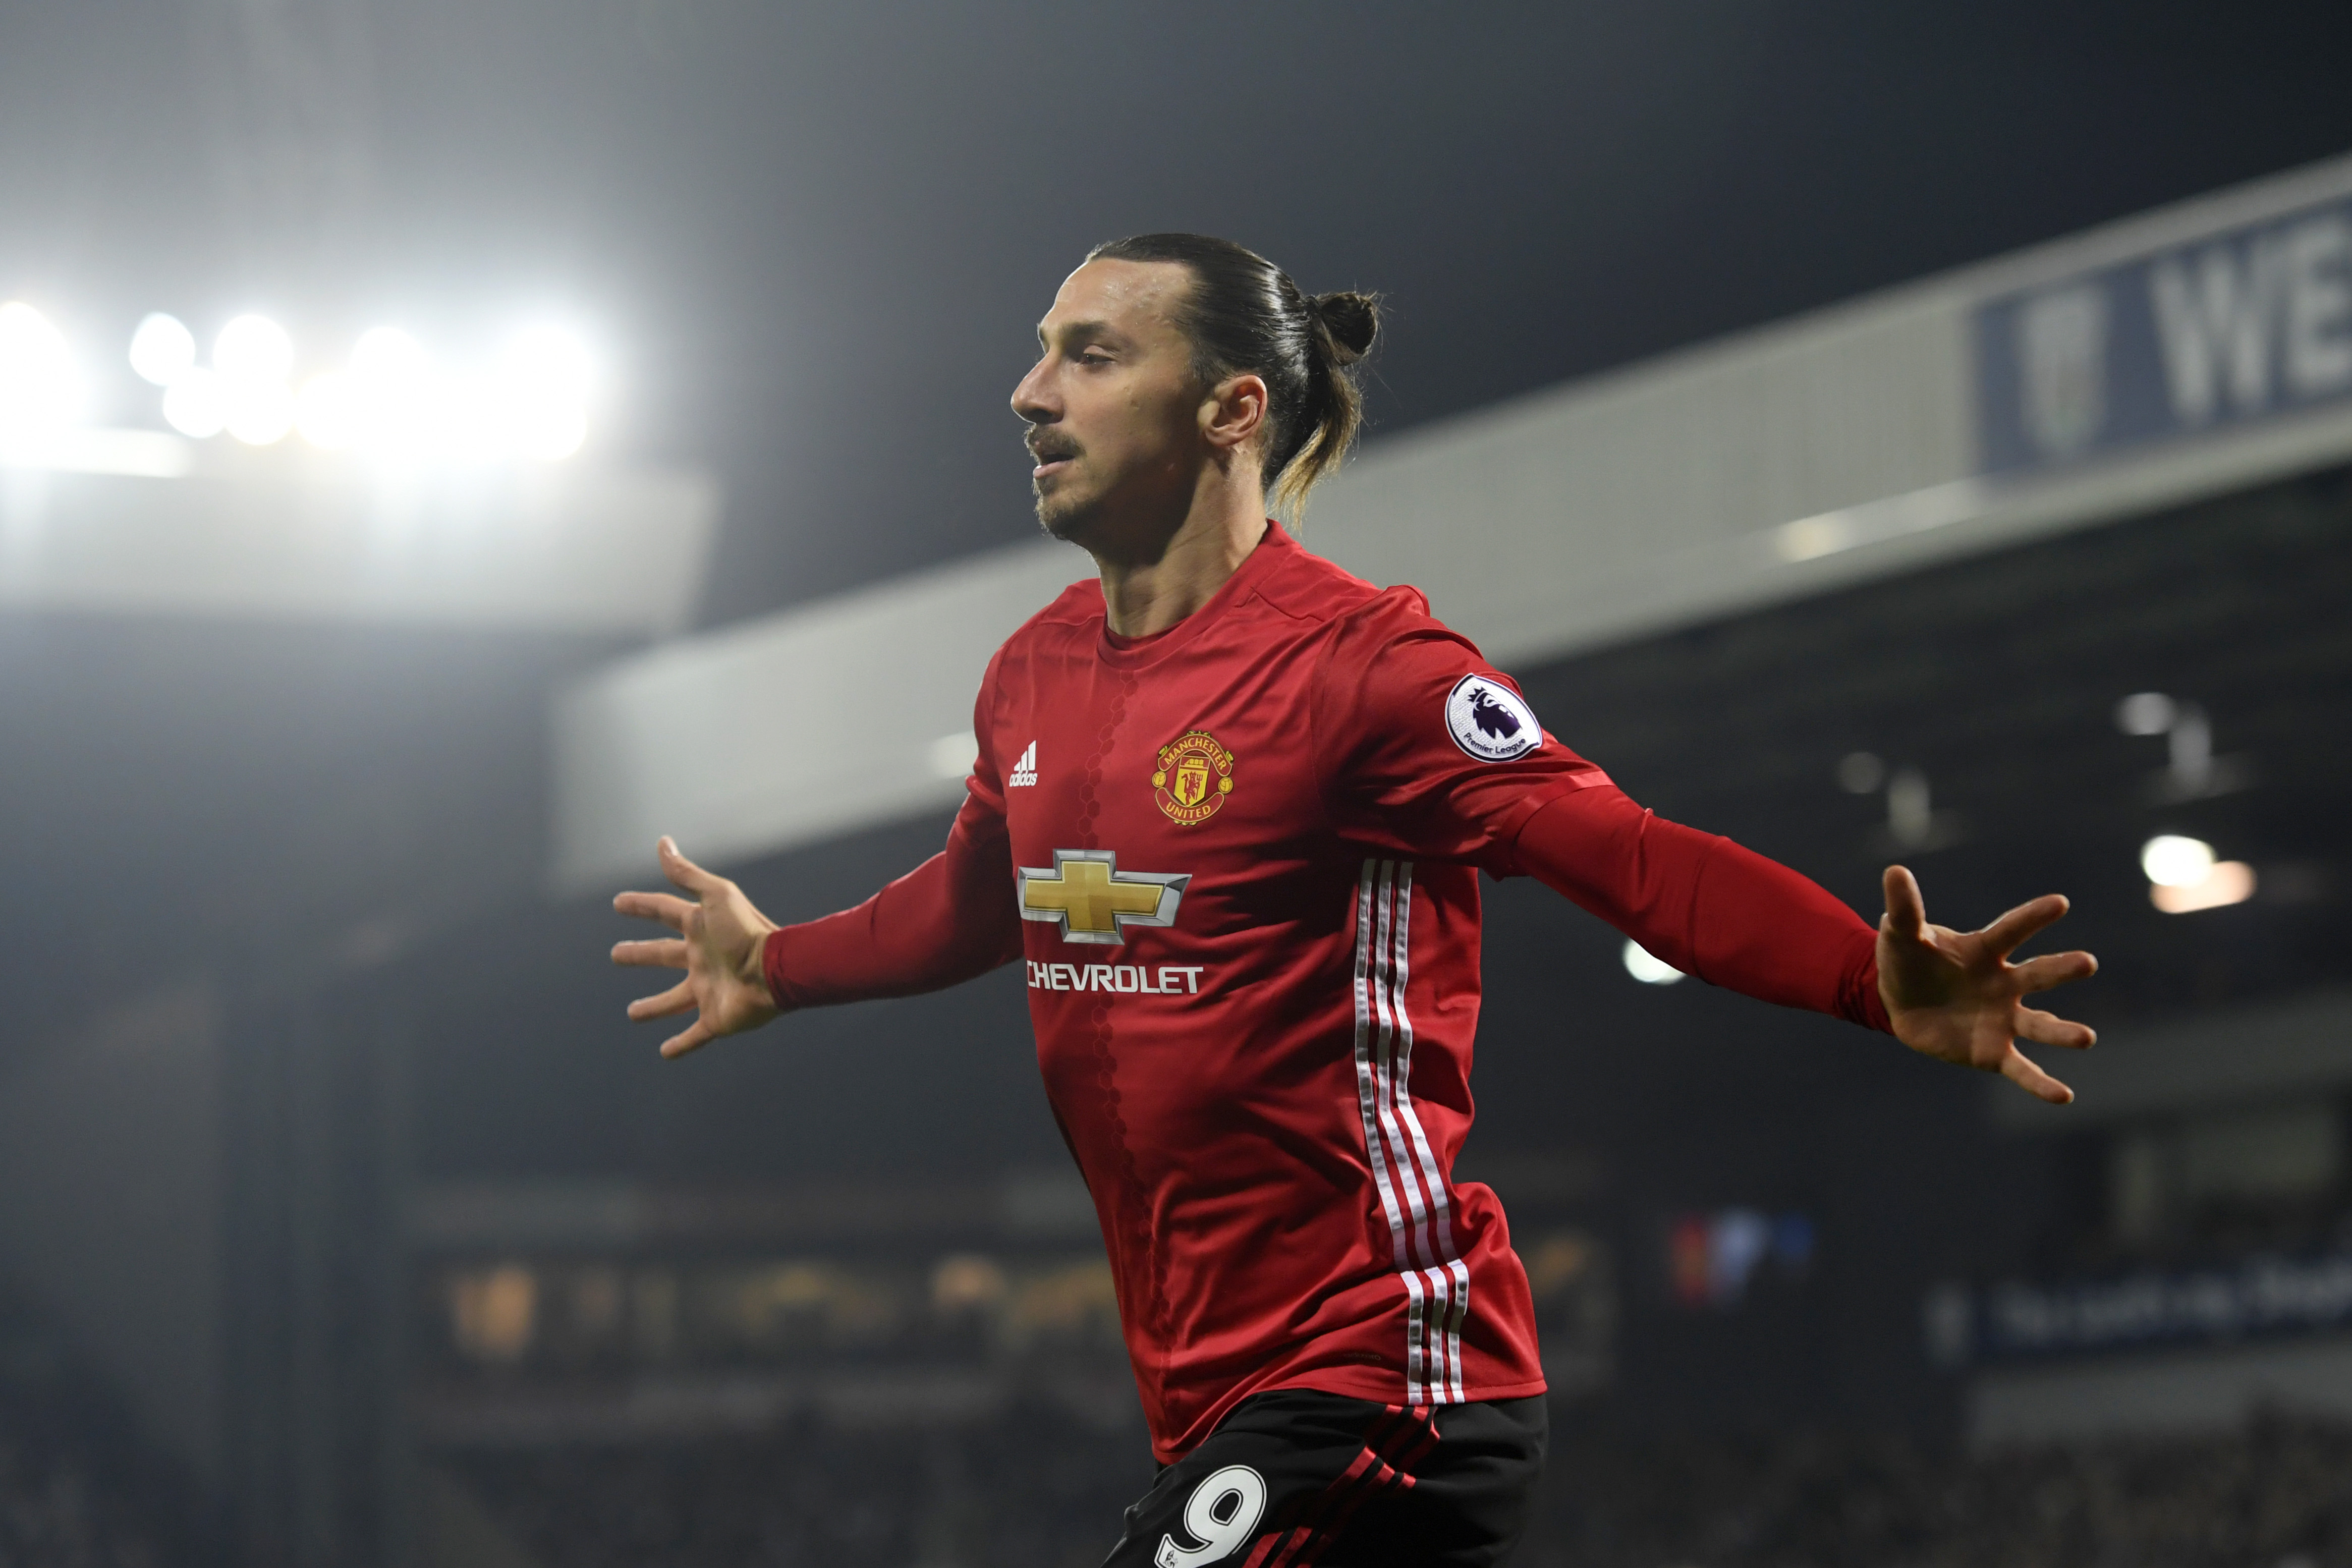 Stop me if you can - Zlatan Ibrahimovic has been at his prolific best for Manchester United this season. (Photo courtesy - Stu Forster/Getty Images)